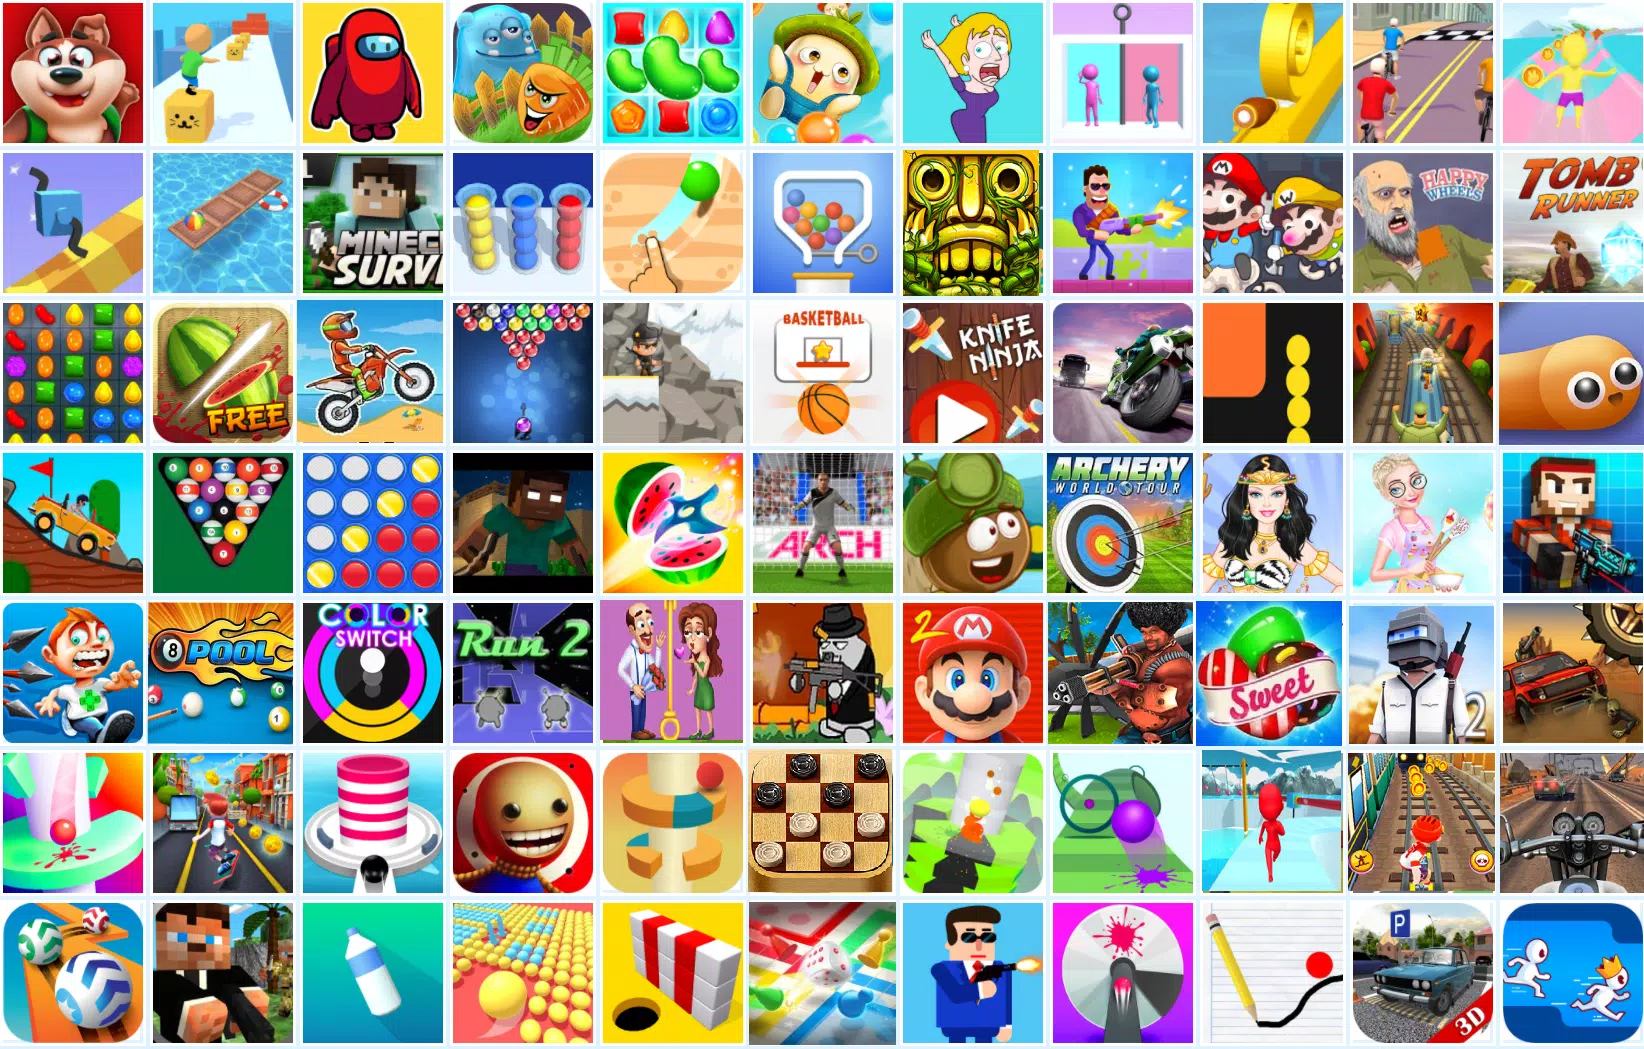 All Games Games Free Download